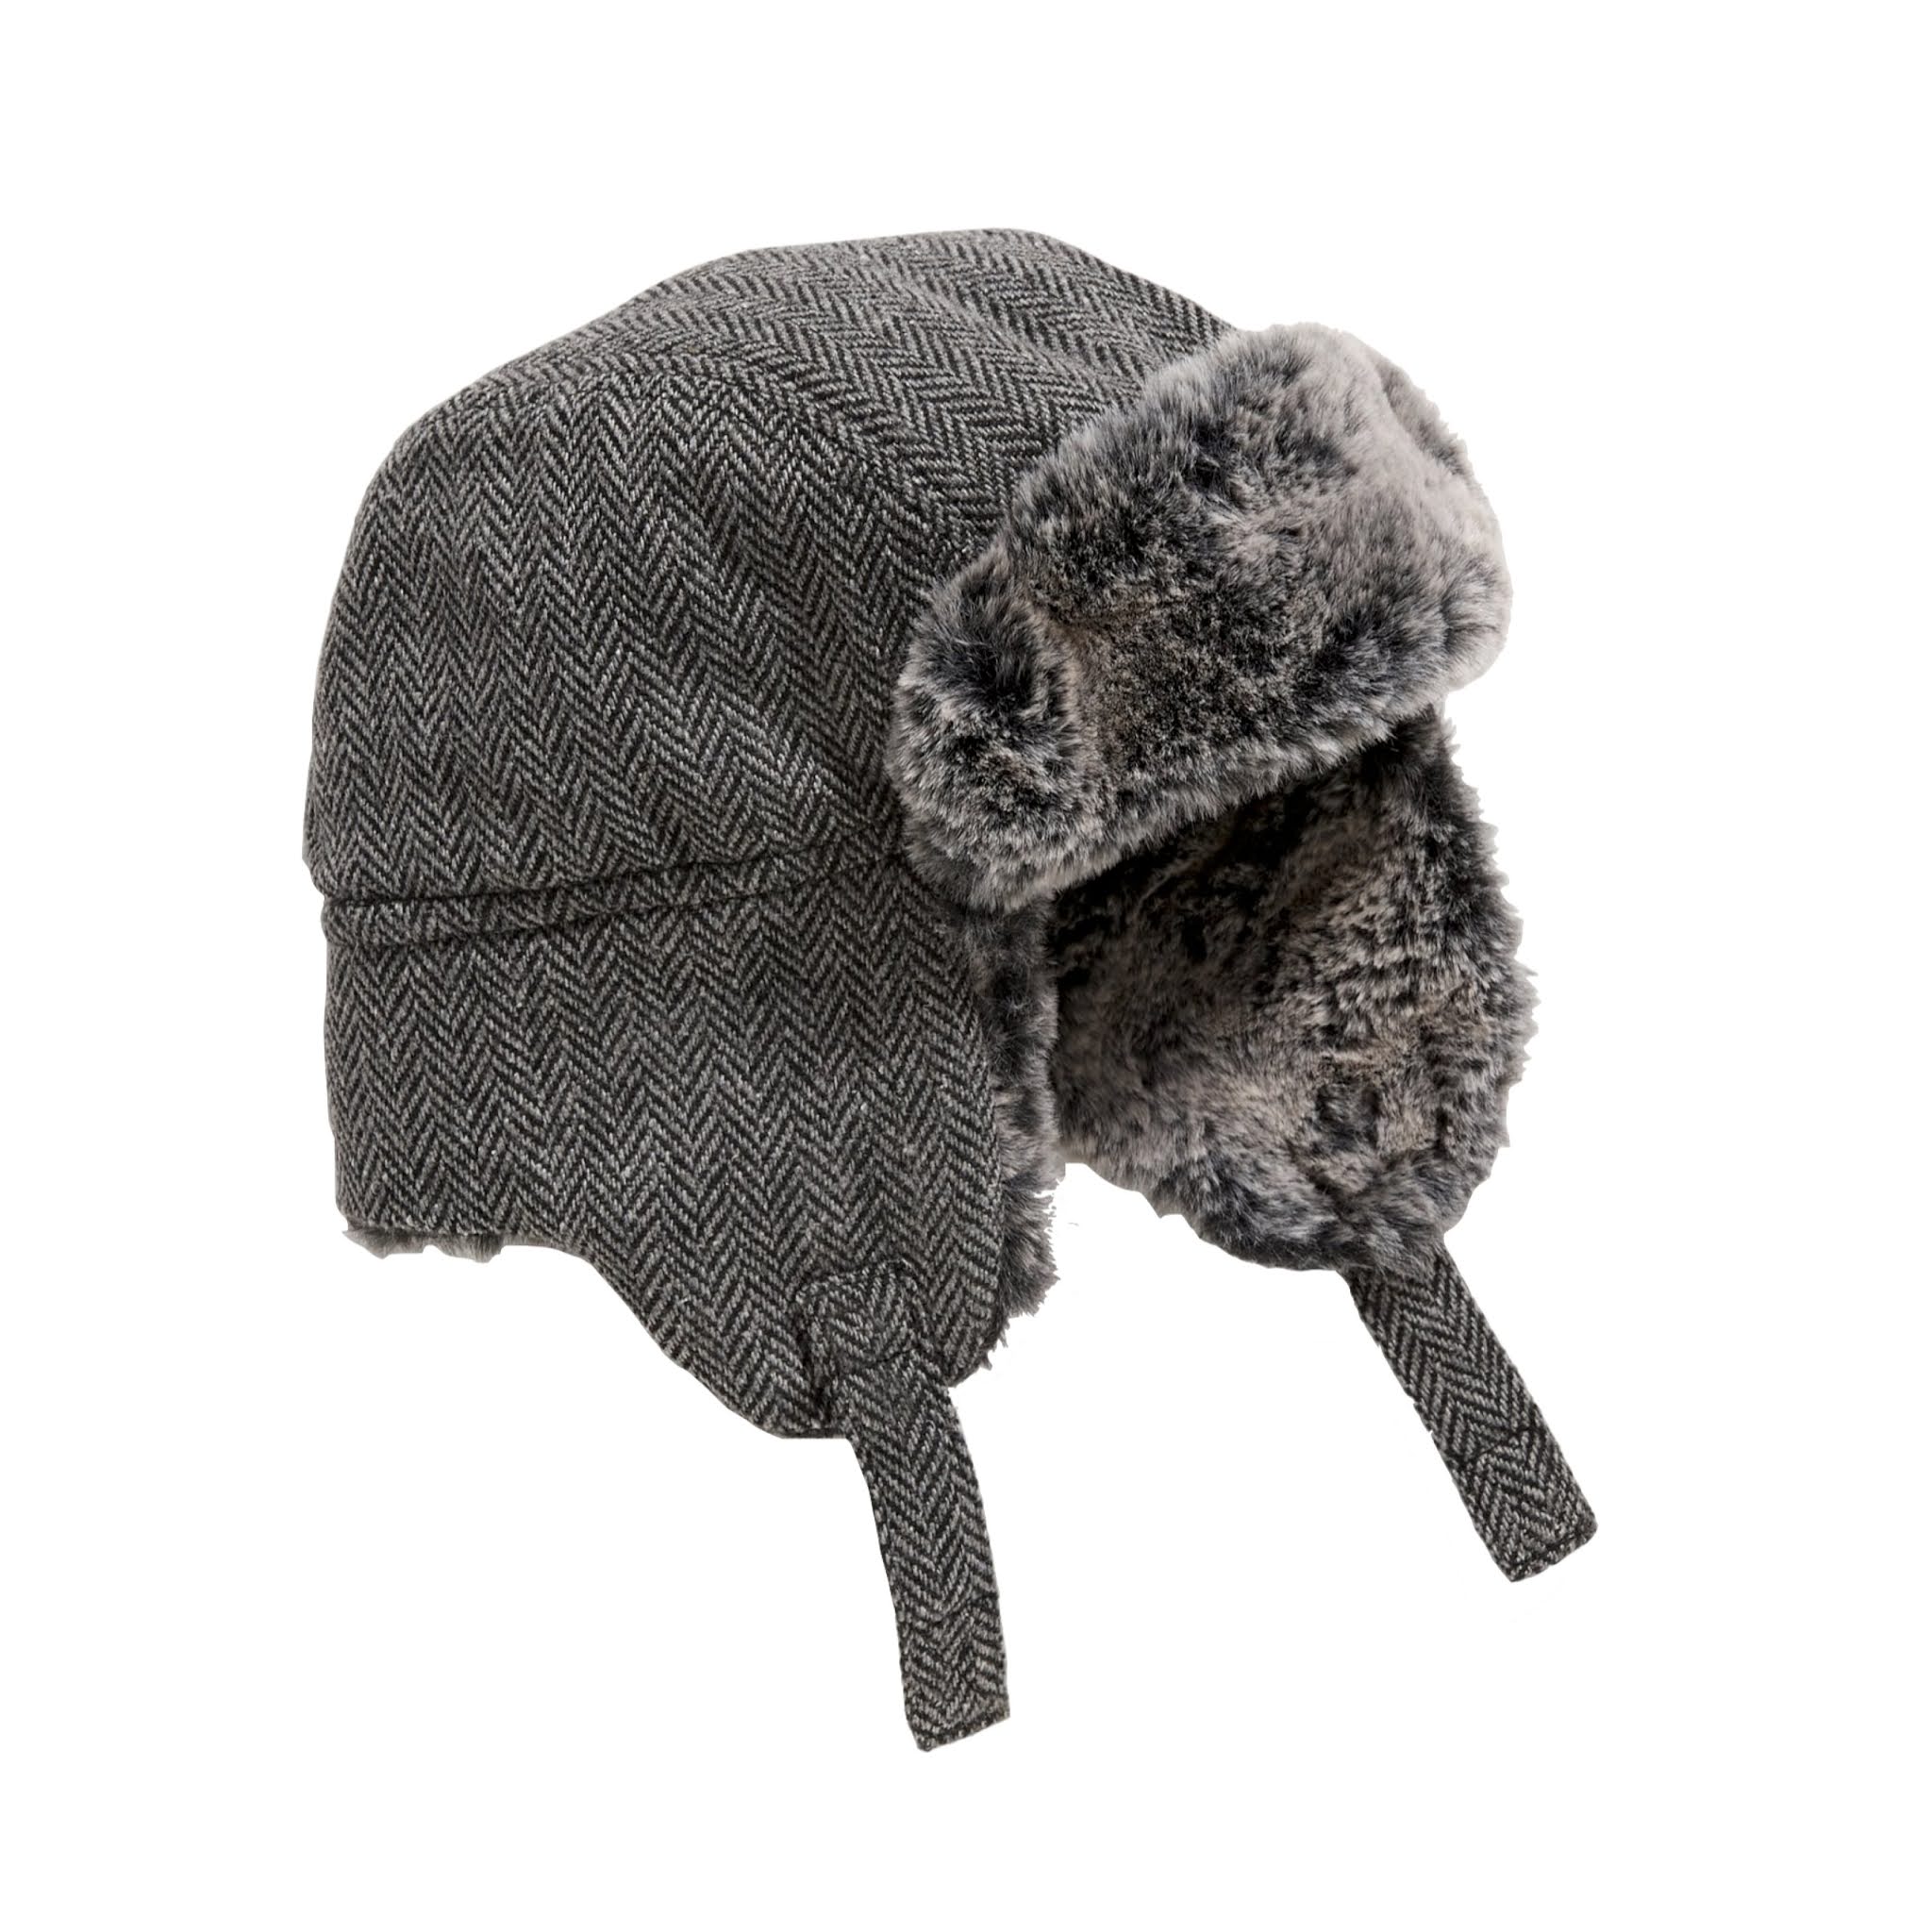 Baby Herringbone Trapper Hat from Old Navy